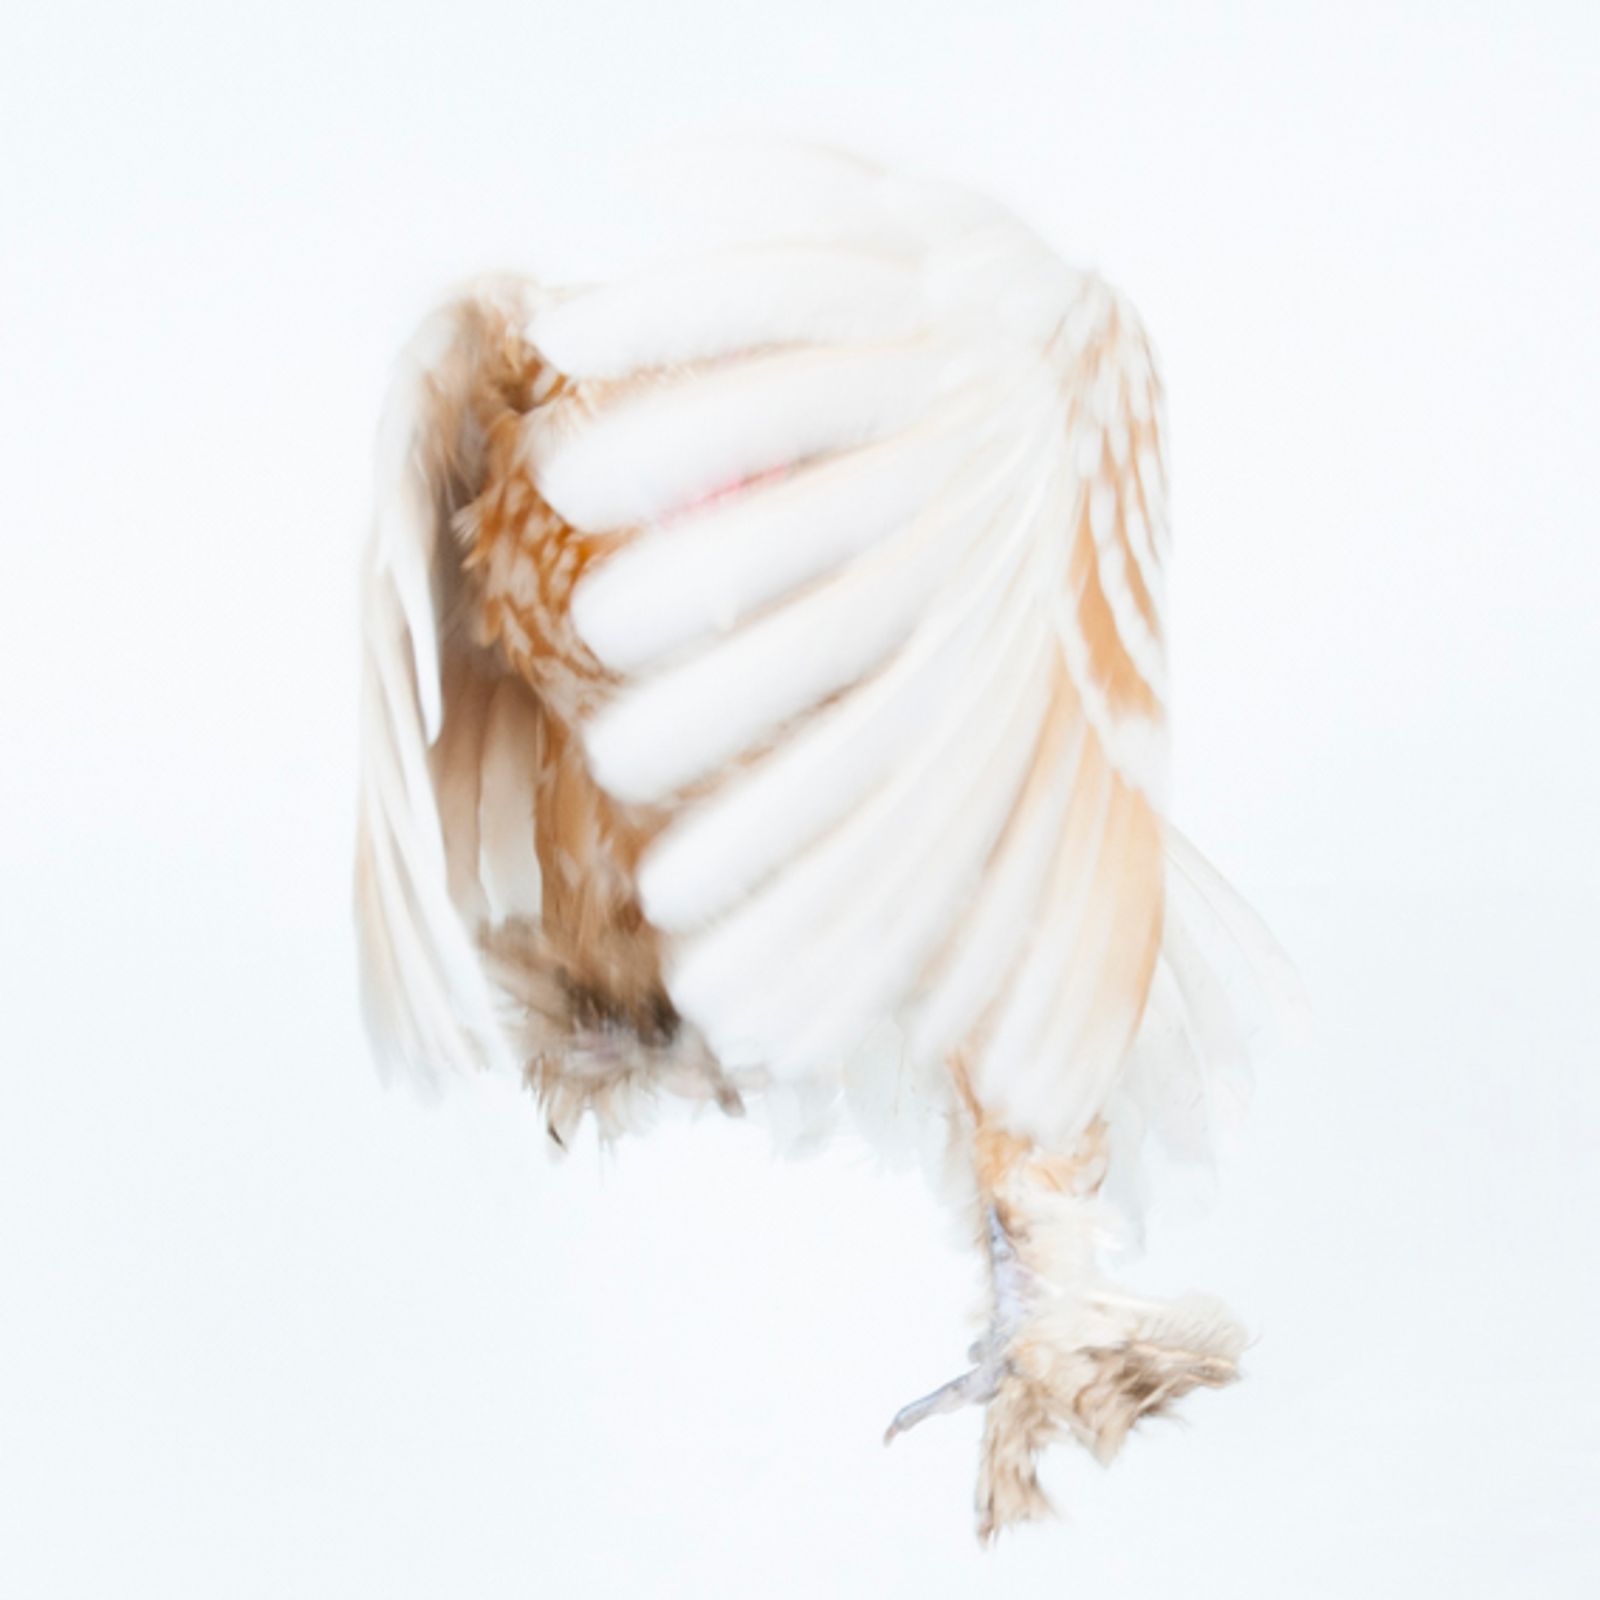 © Emanuela Colombo - Image from the Chickens photography project